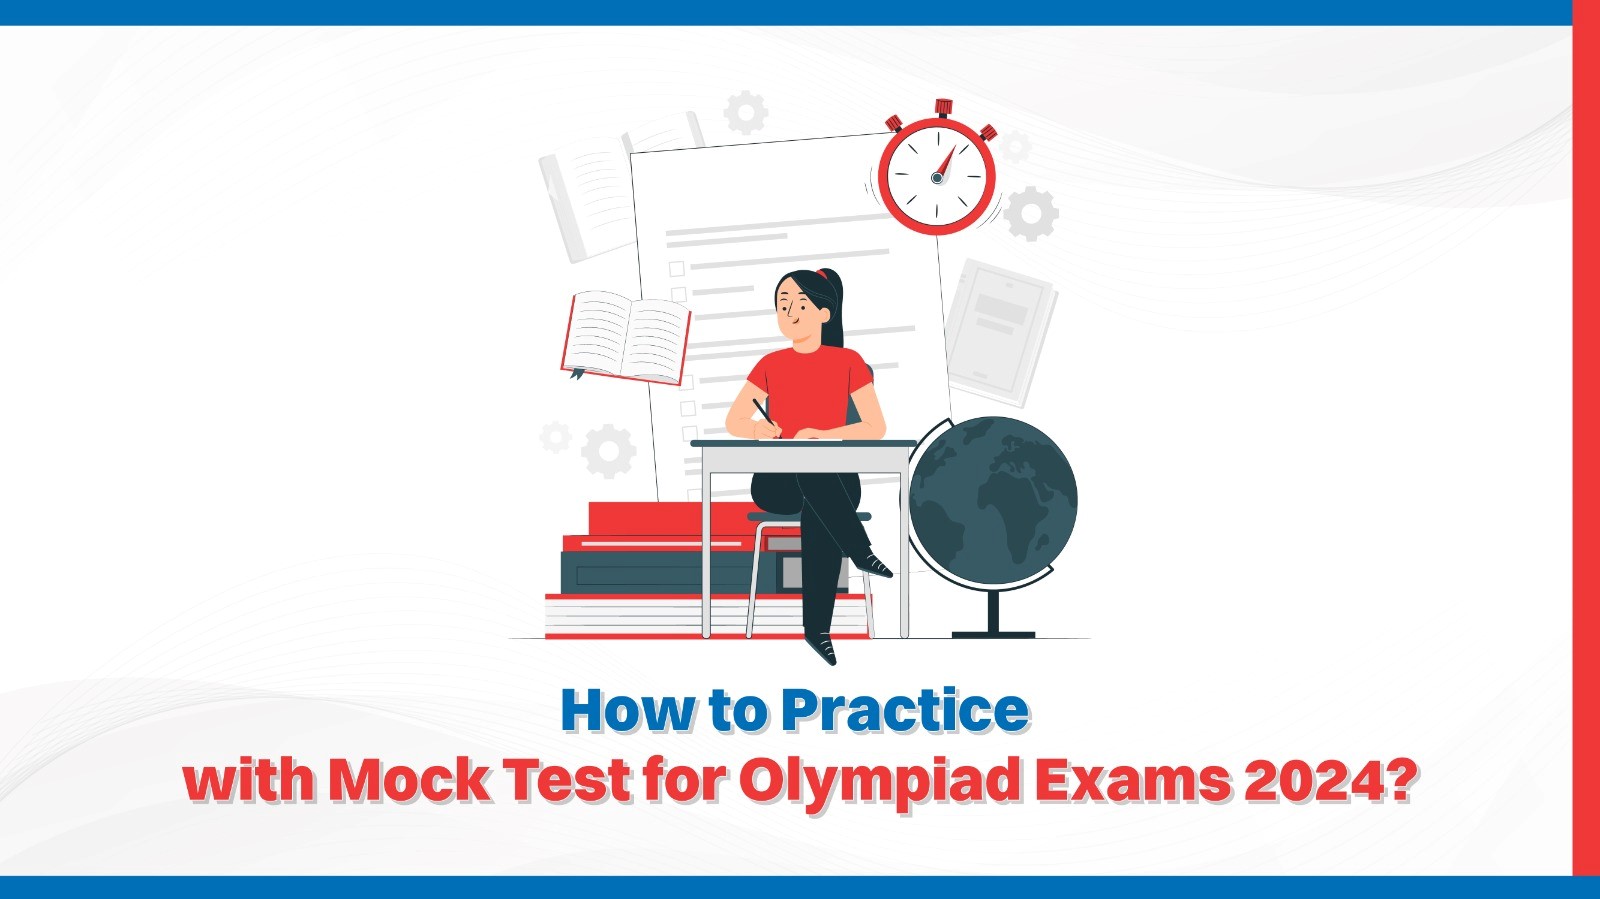 How to Practice with Mock Test for Olympiad Exams 2024.jpg